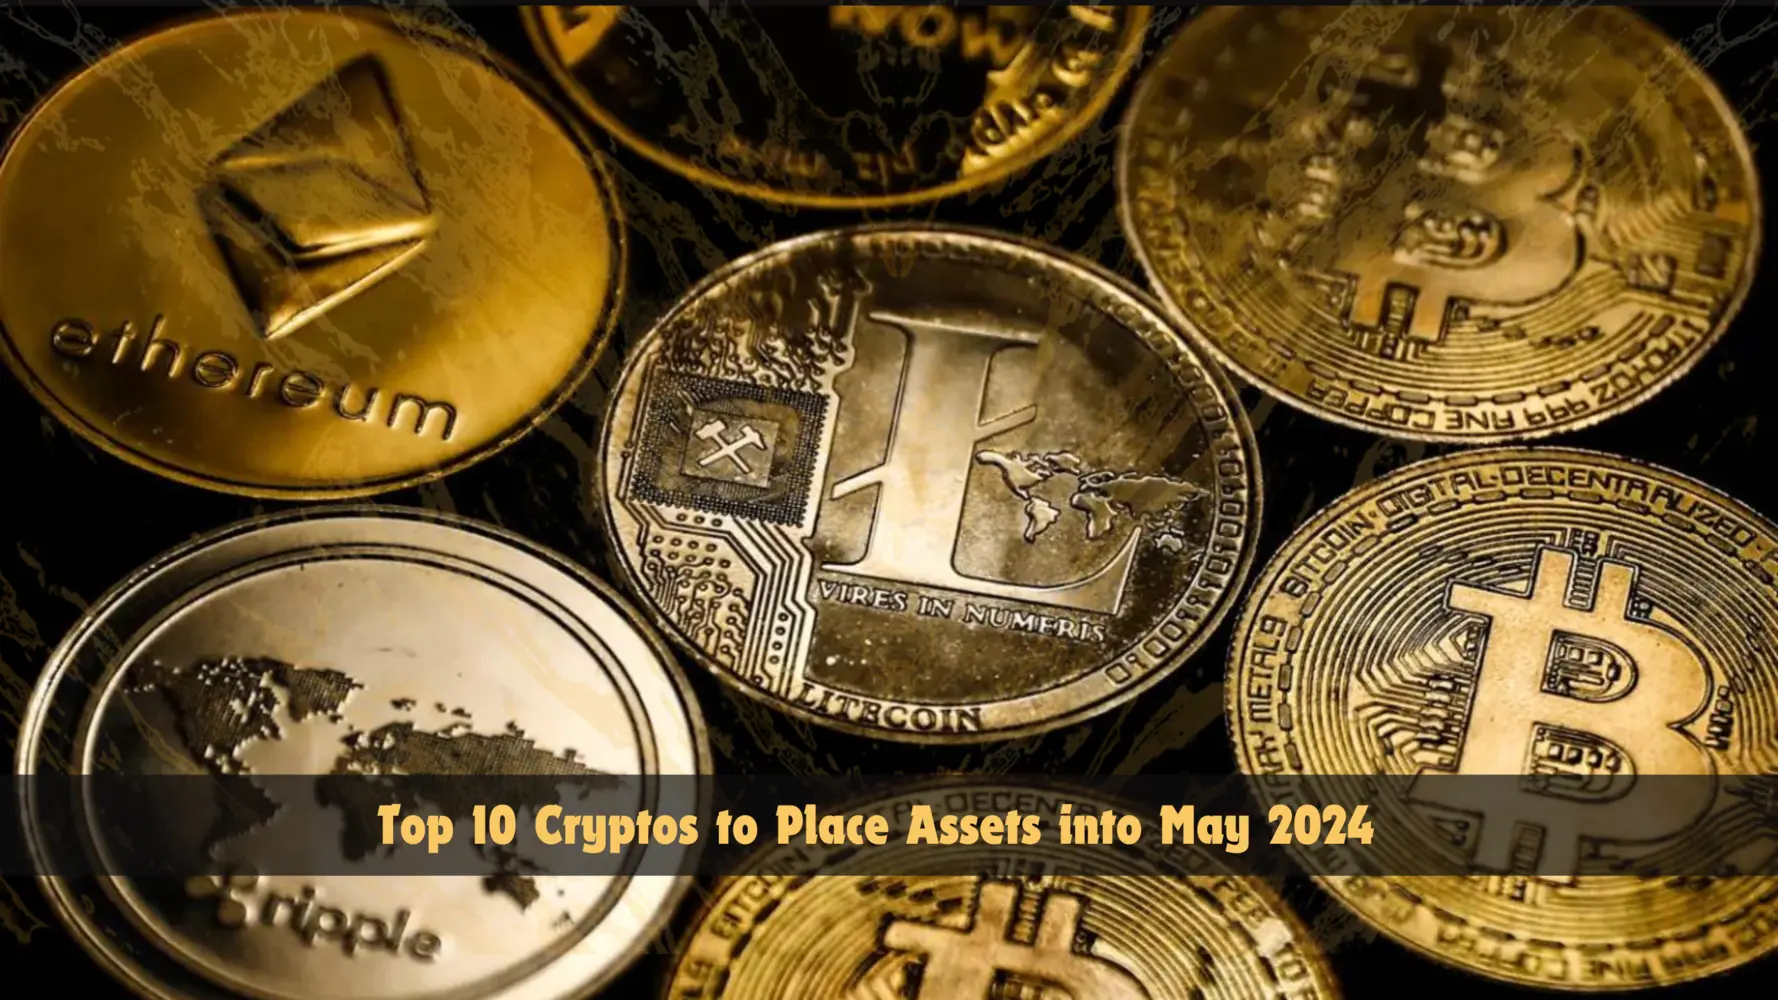 Top 10 Cryptos to Place Assets into May 2024